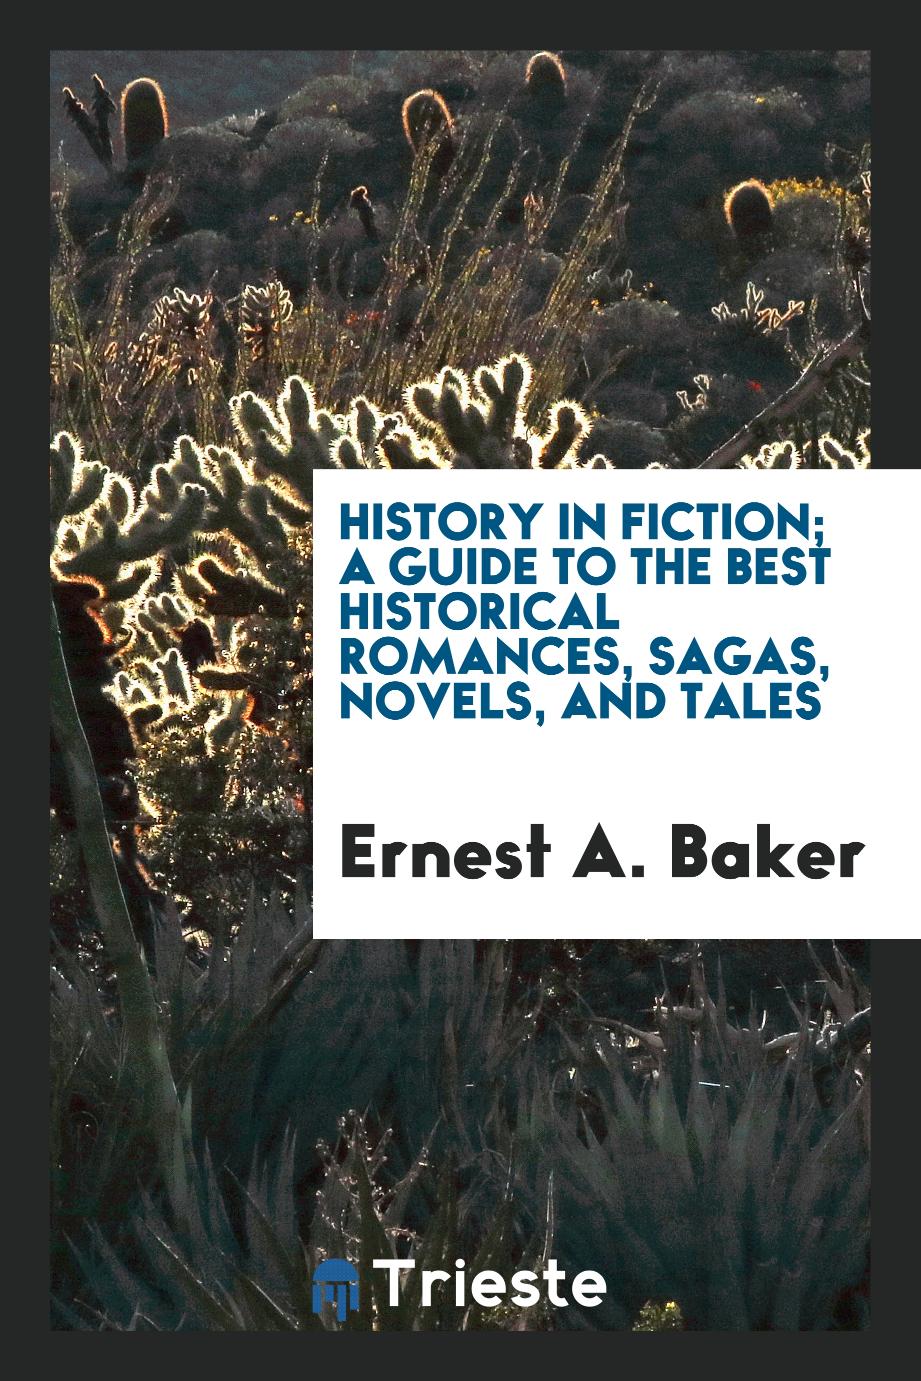 History in fiction; a guide to the best historical romances, sagas, novels, and tales